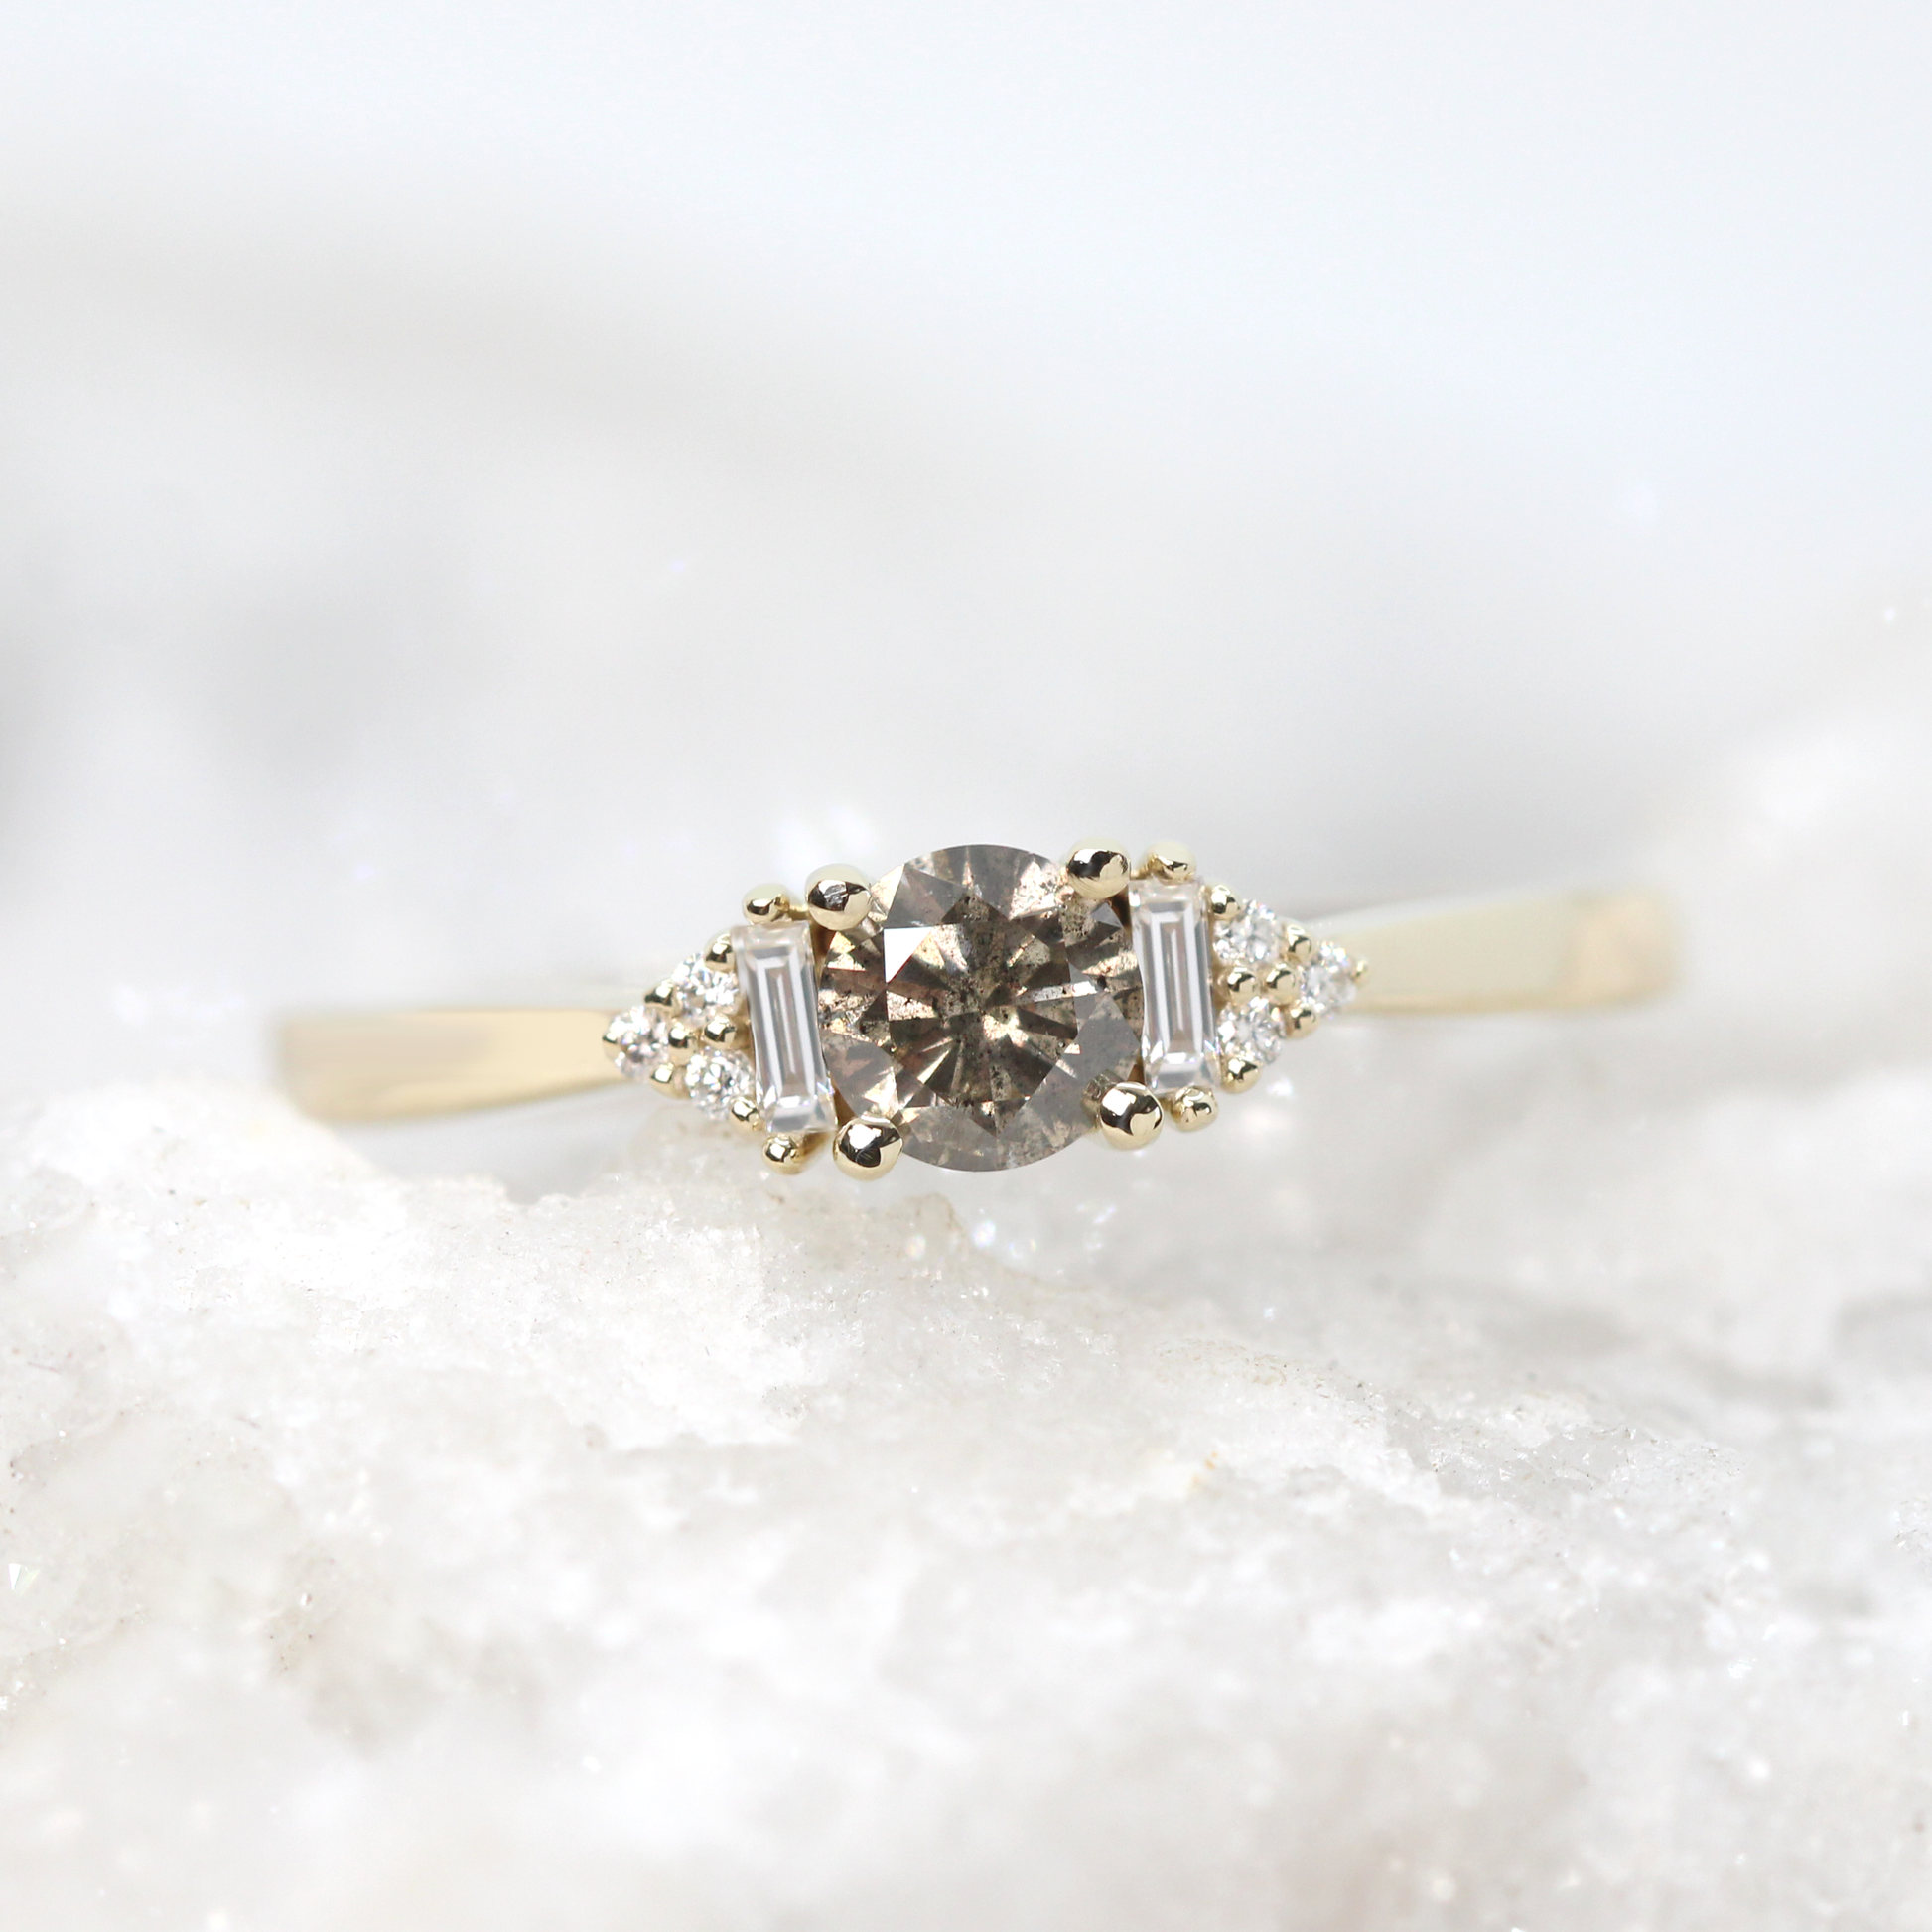 Autumn Ring with a 0.56 Carat Round Champagne Celestial Diamond and White Accent Diamonds in 14k Yellow Gold - Ready to Size and Ship - Midwinter Co. Alternative Bridal Rings and Modern Fine Jewelry